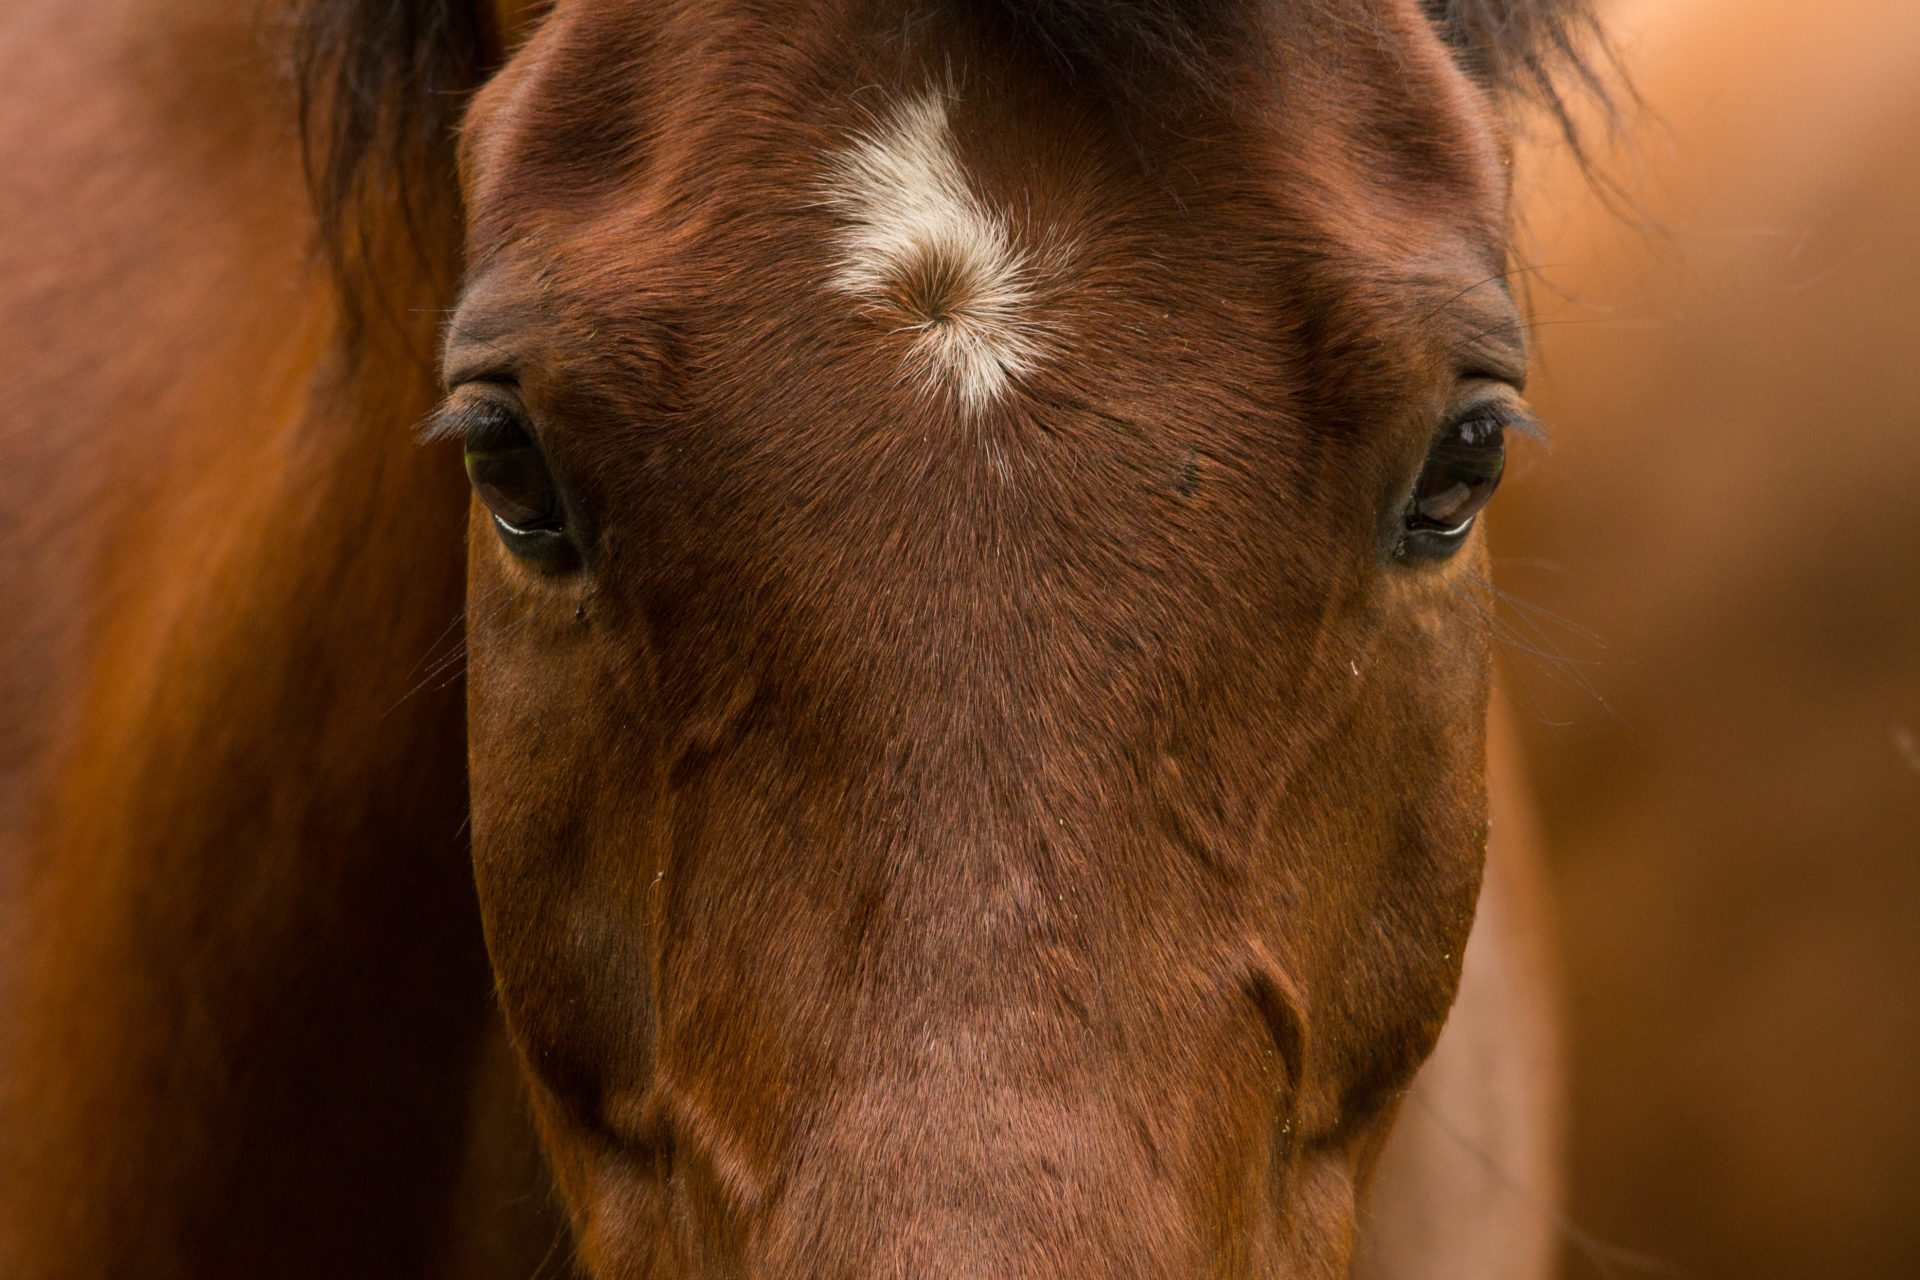 Photograph of a horse rearing up